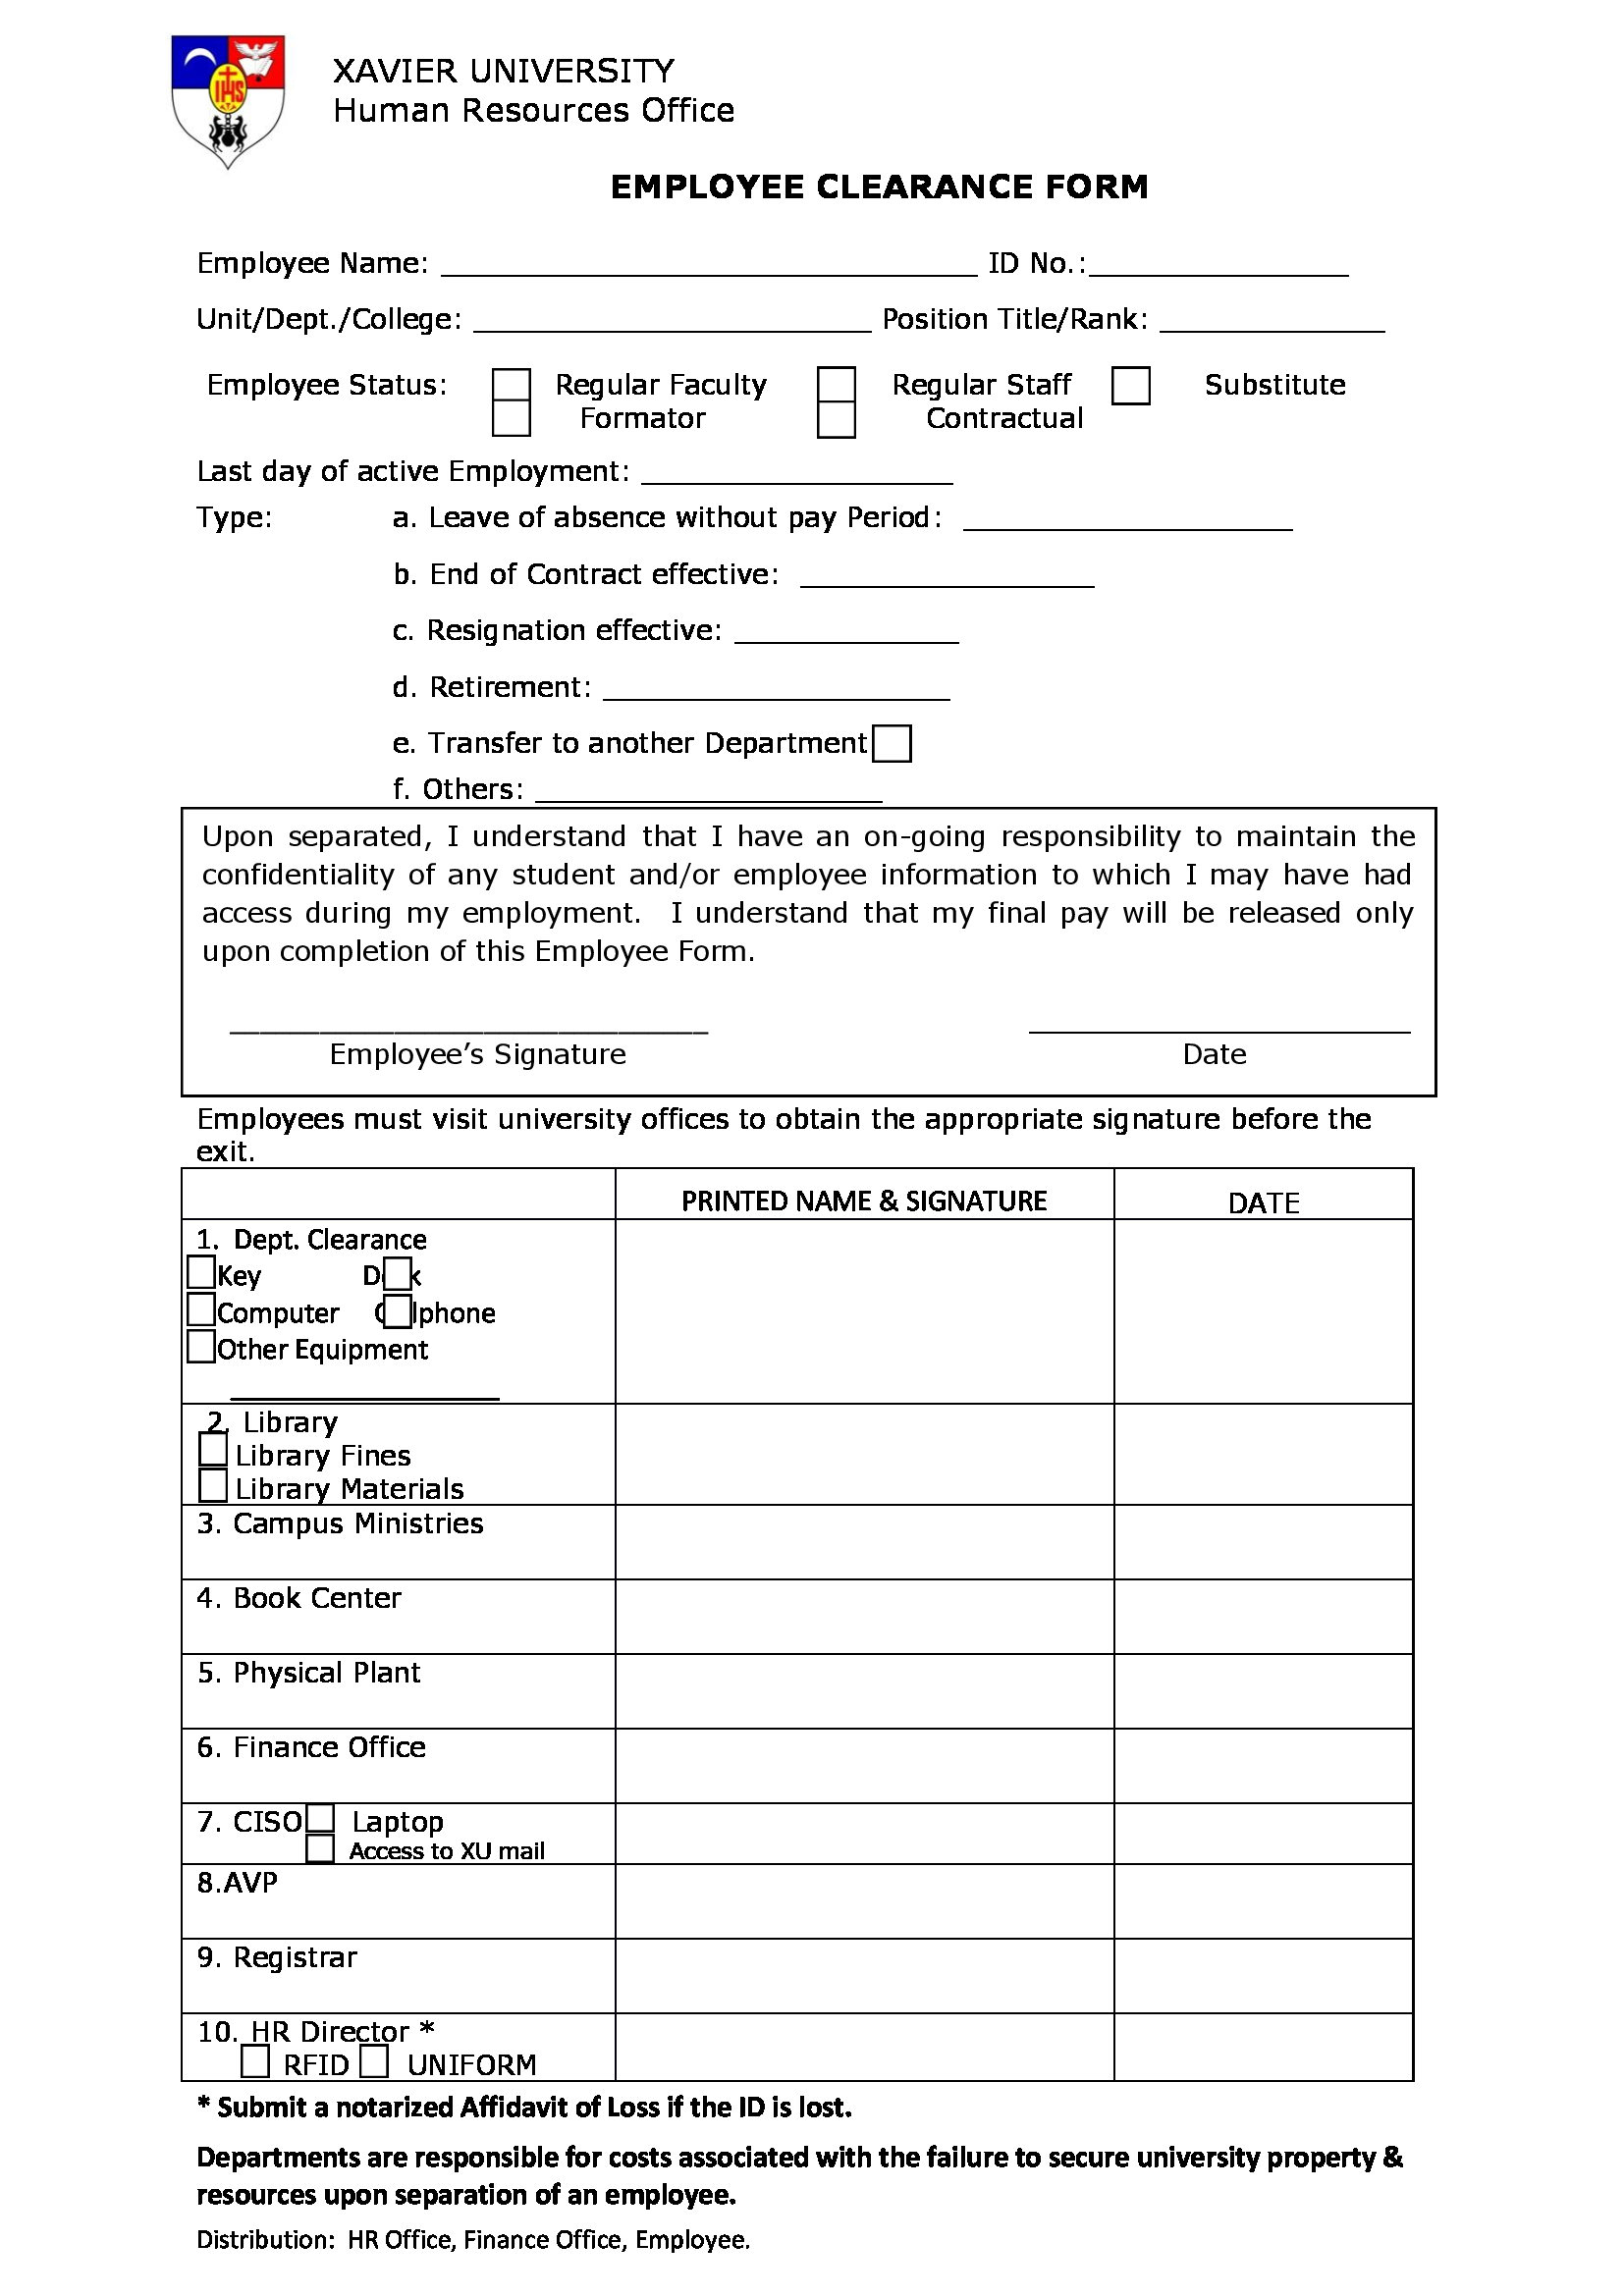 employee clearance form